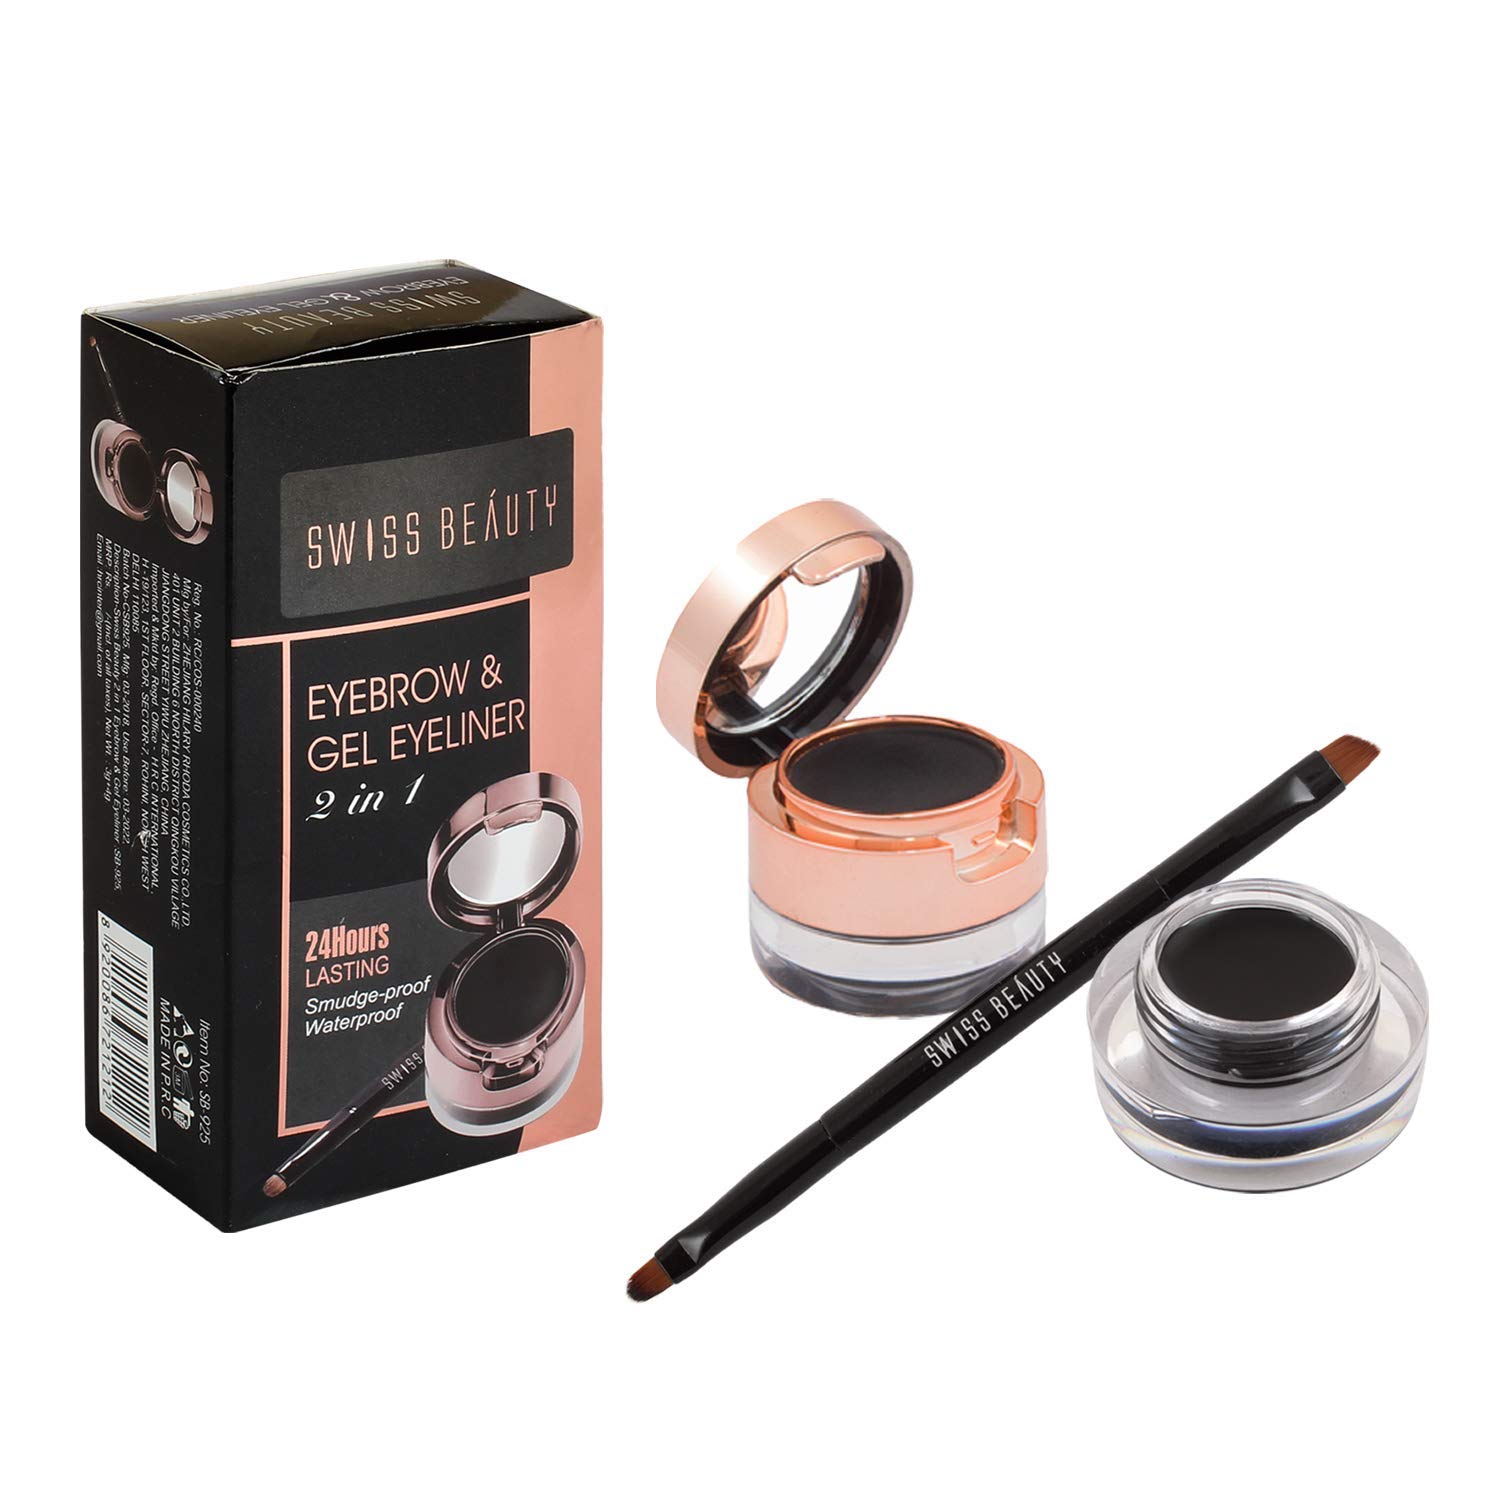 Swiss Beauty B W All Gel Eyeliner And Eyebrow 2 In 1 24 Hours Lasting Smudge And Water Proof Black Buy Online In Cambodia Swiss Beauty Products In Cambodia